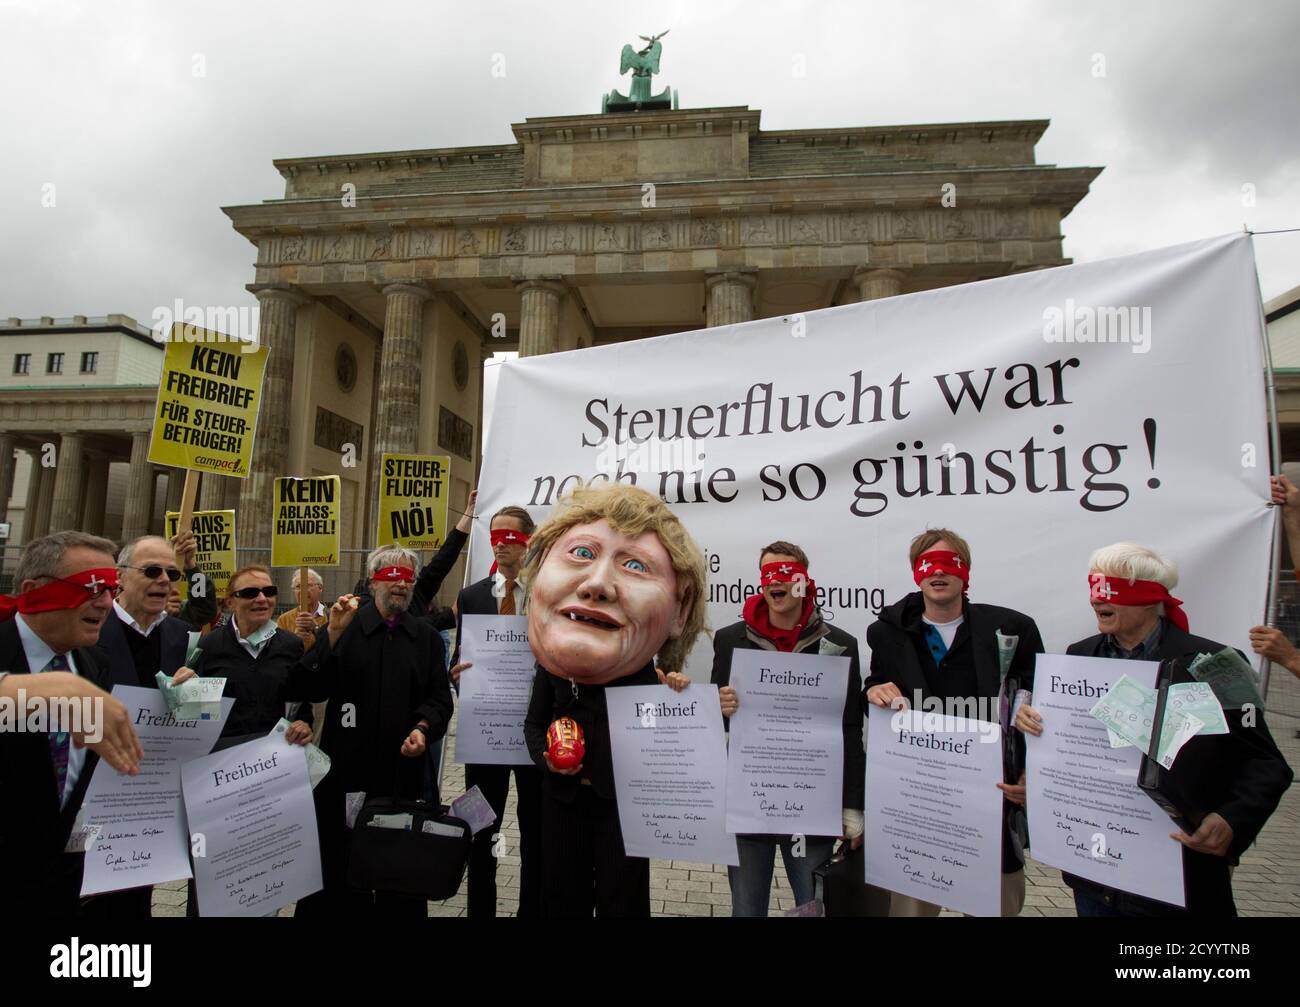 Activists from the "compact" group demonstrate against the new planned tax  agreement with Switzerland in front of the Brandenburg gate in Berlin,  August 10, 2011. The protester at centre wears a mask